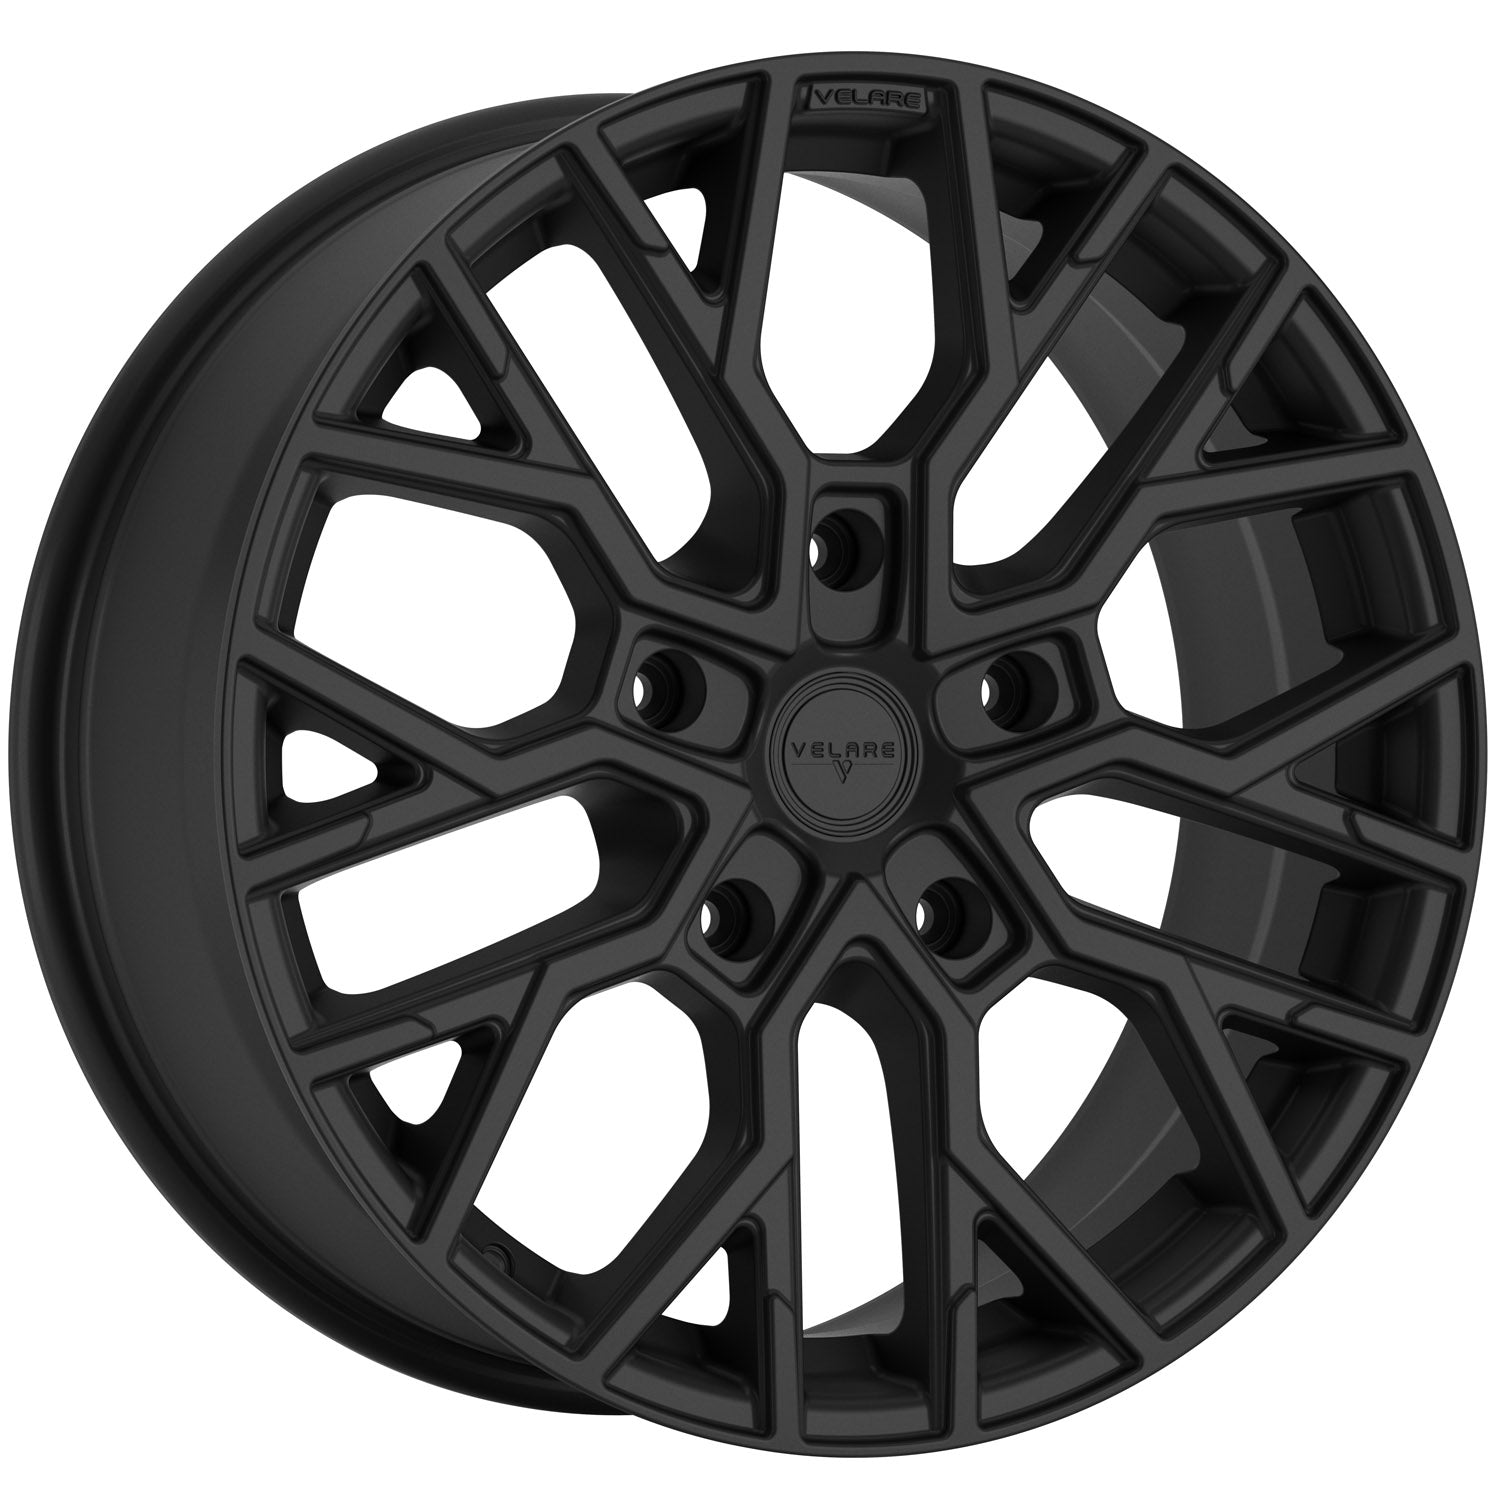 VLR-T Wheel and Tyre Package